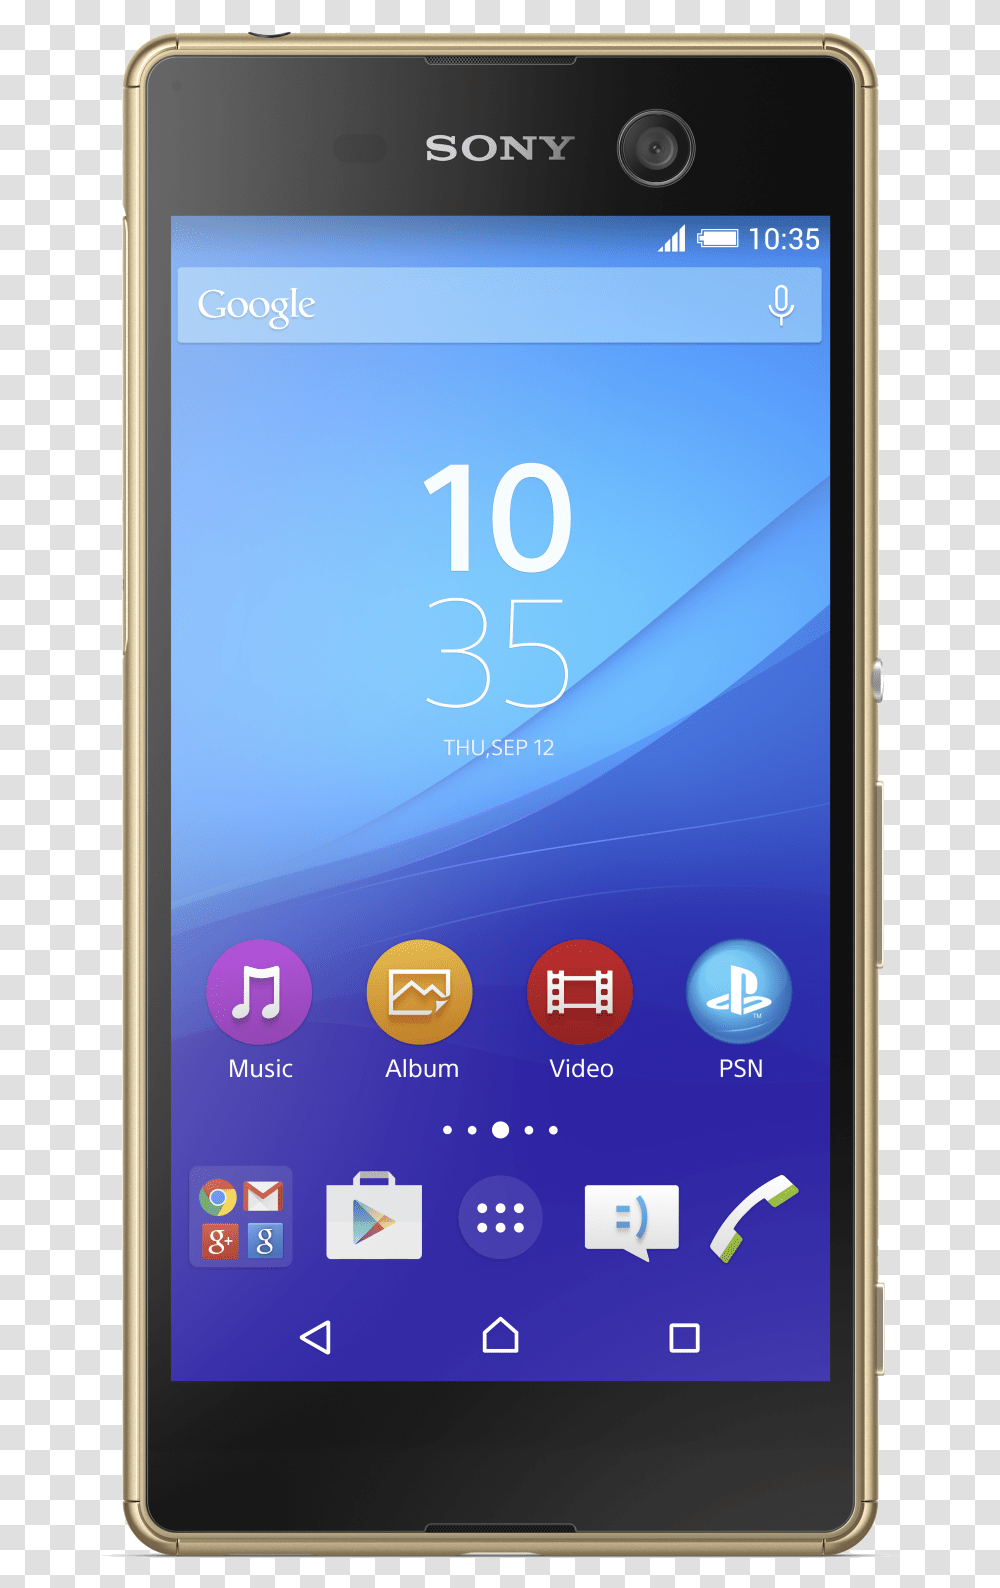 Thumb Image Sony Xperia M5 Price In Pakistan, Mobile Phone, Electronics, Cell Phone, Iphone Transparent Png